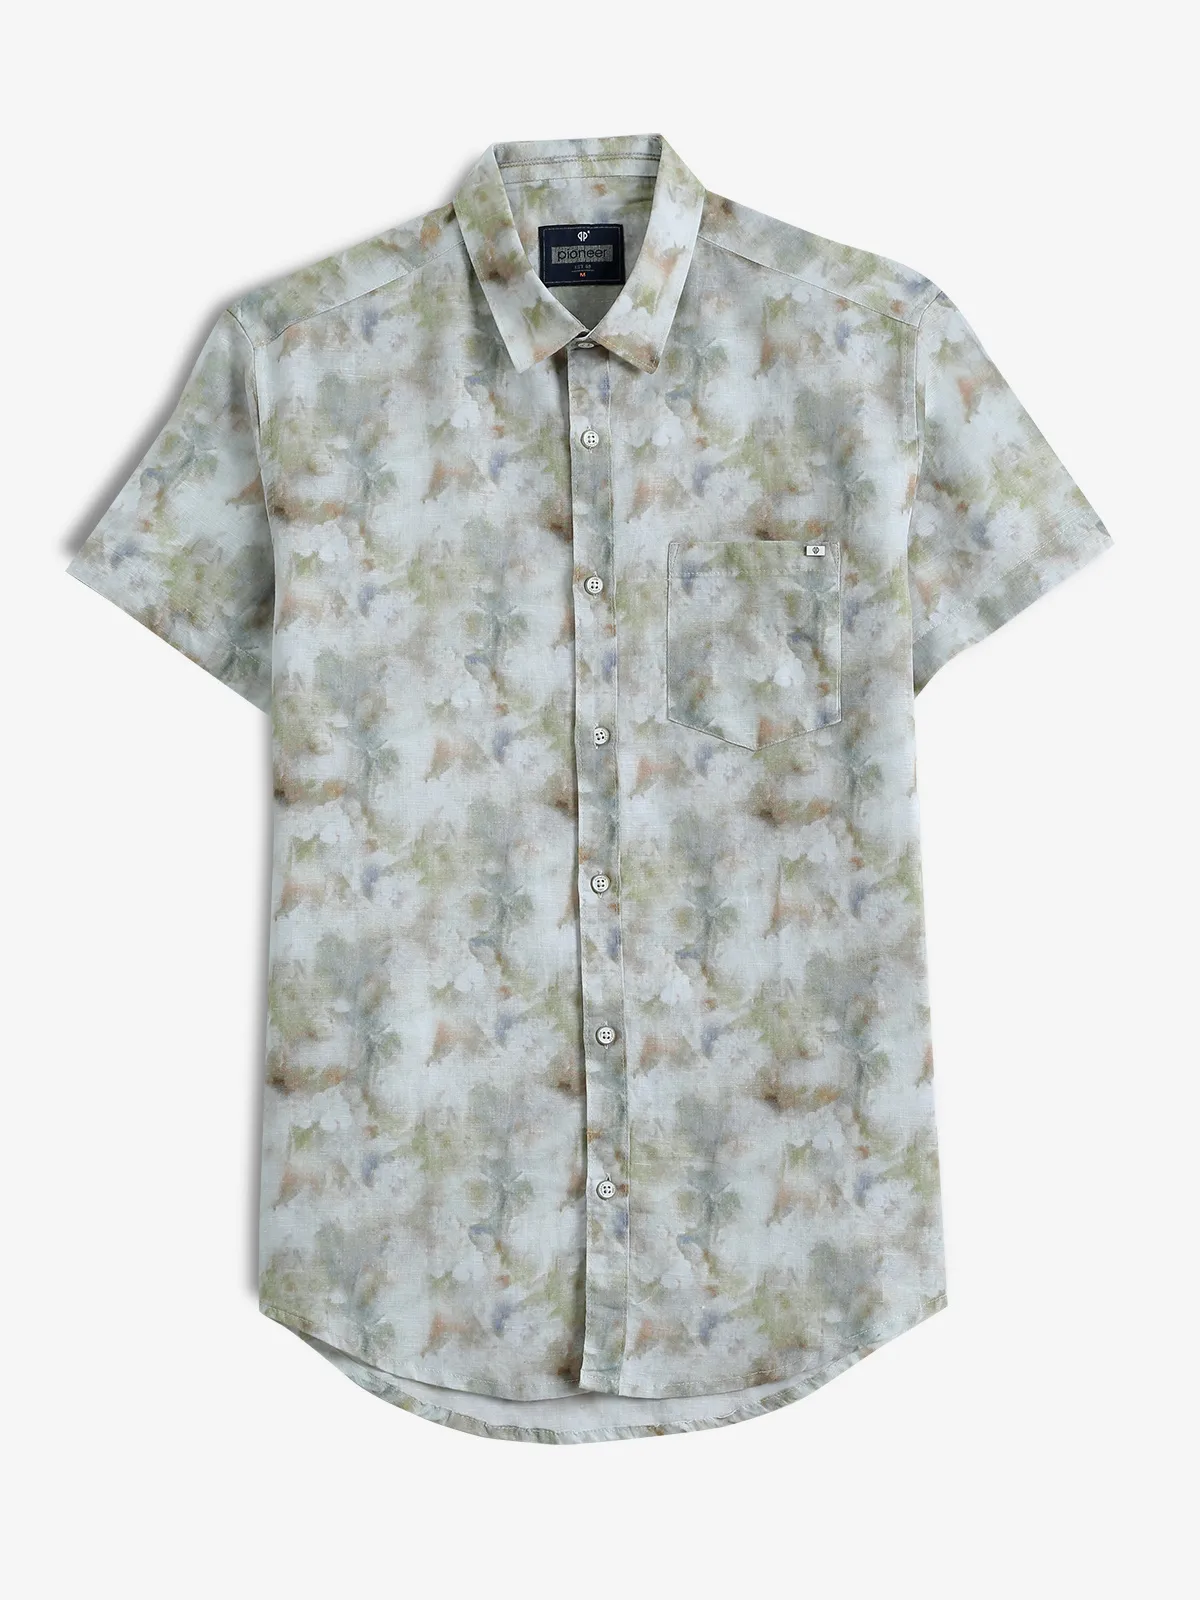 PIONEER printed olive and white linen shirt